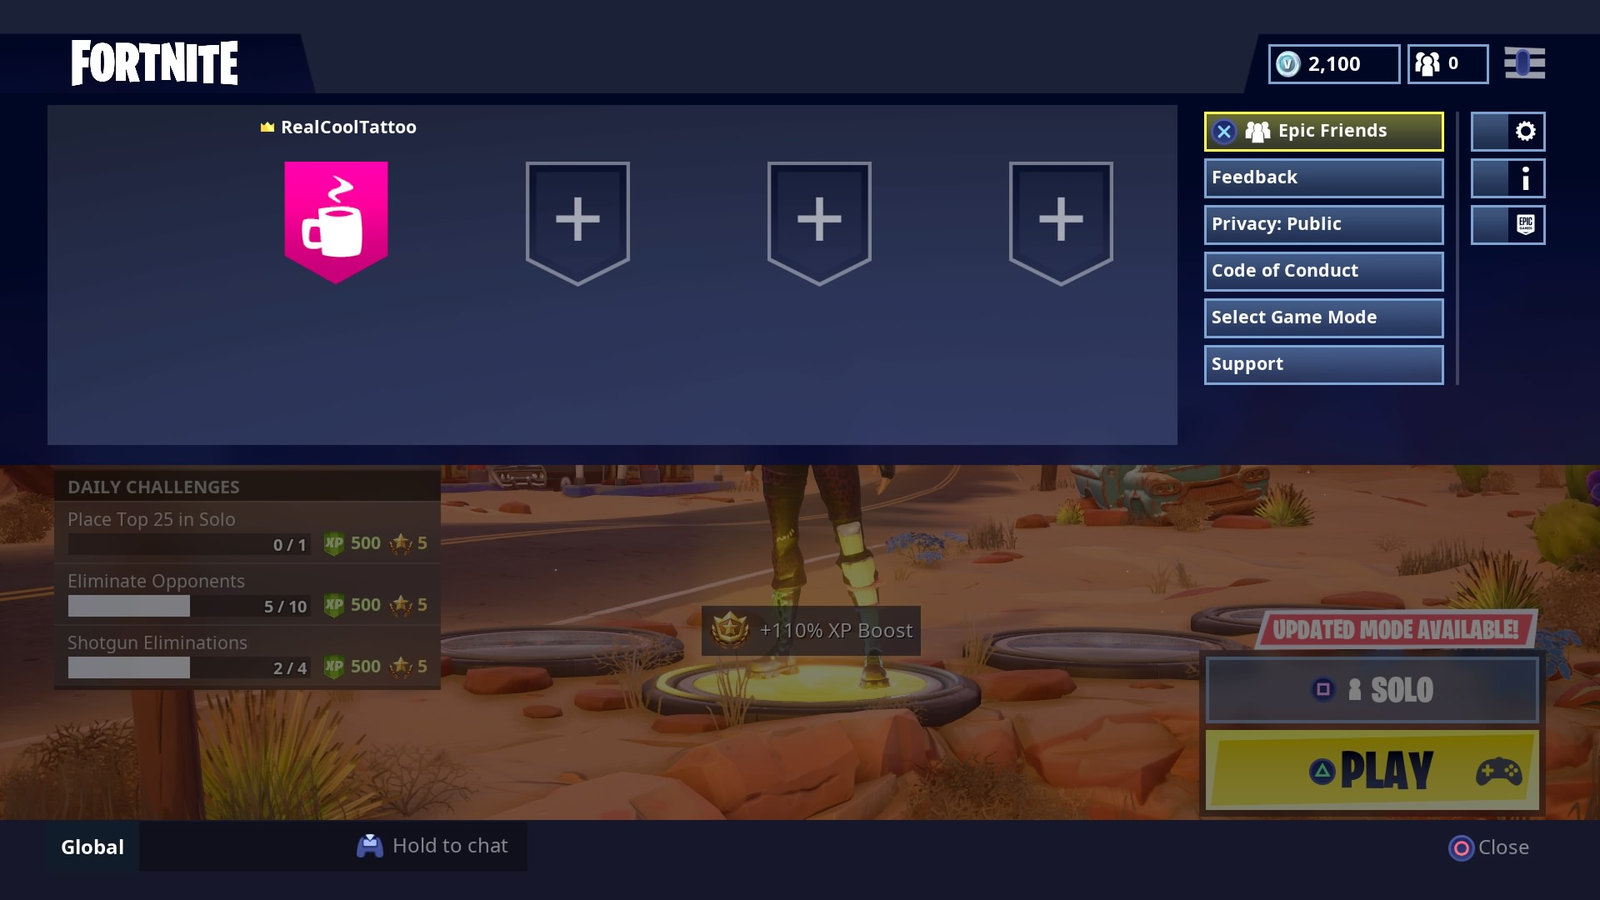 Fortnite Crossplay: How to Play with Friends